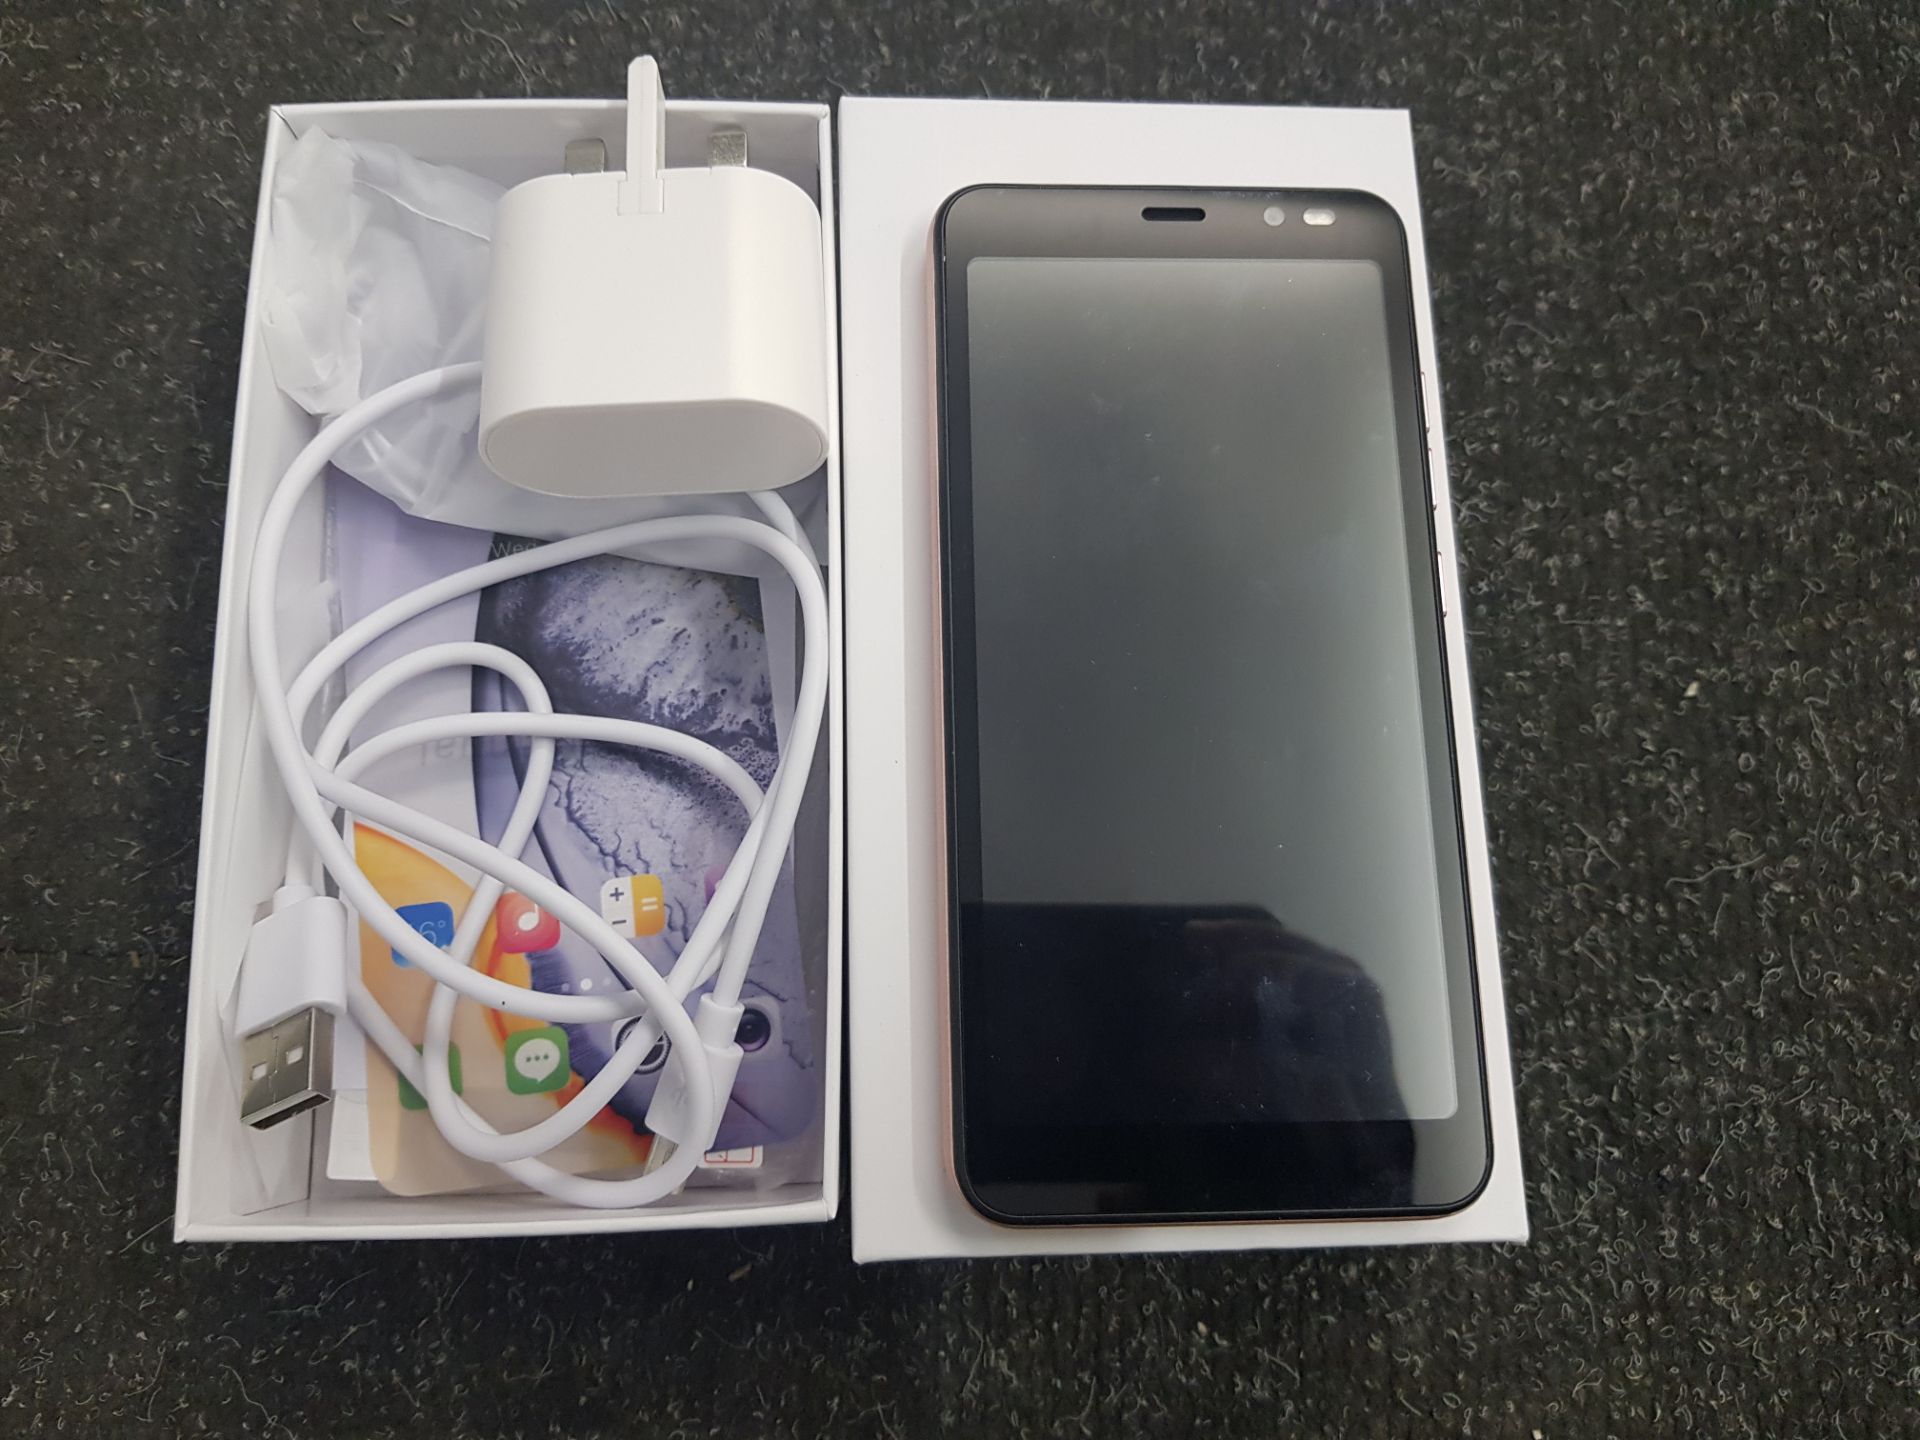 BOXED LCIEA MOBILE PHONE (DOES NOT POWER ON) RRP £80Condition ReportDOES NOT POWER ON